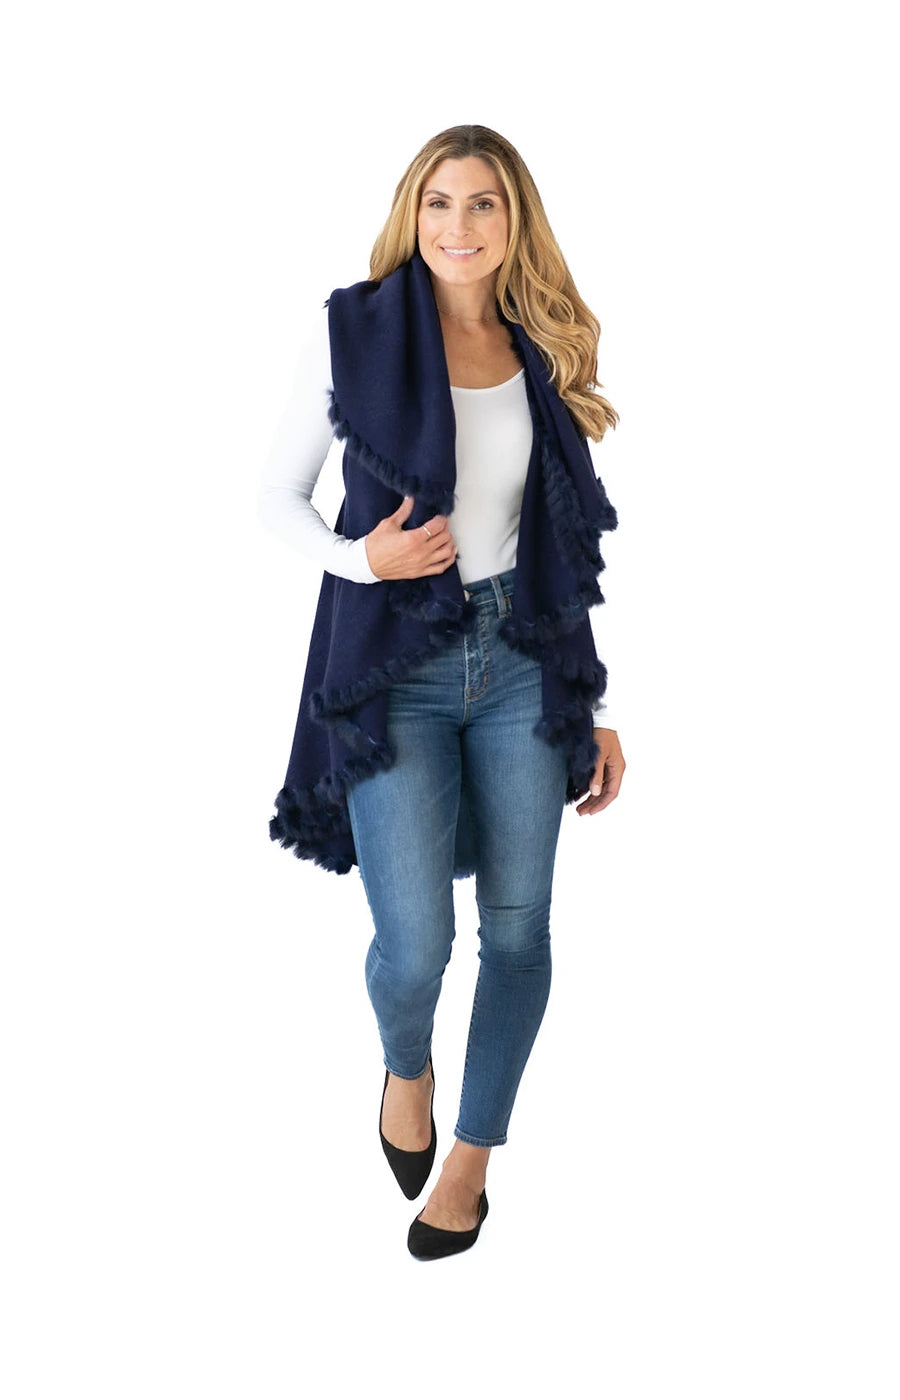 Shawl Sweater Vest in Navy with Fur Trim